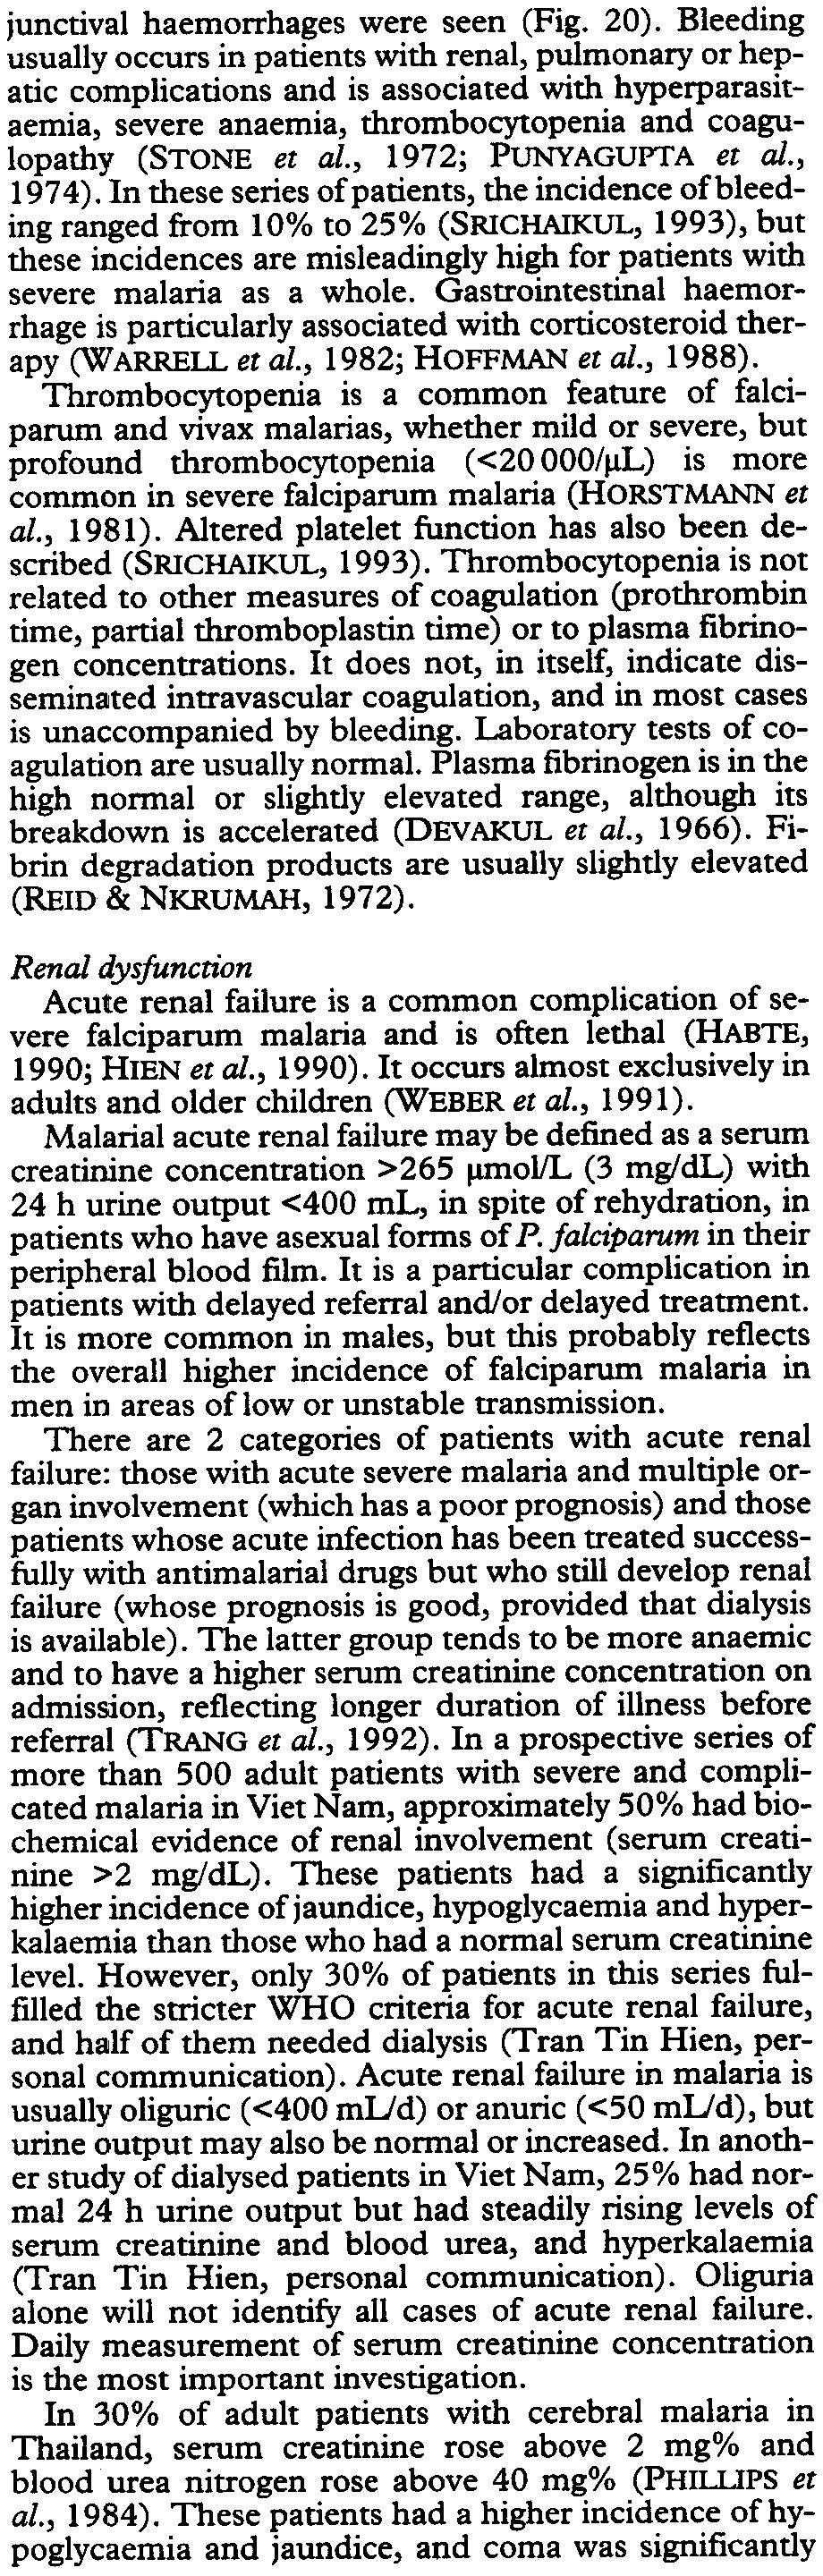 al., 1996). Jaundice and hepatic dysfunction Jaumdice is common in adult patients with malaria (WARRE1L & FRANCIS, 1990).